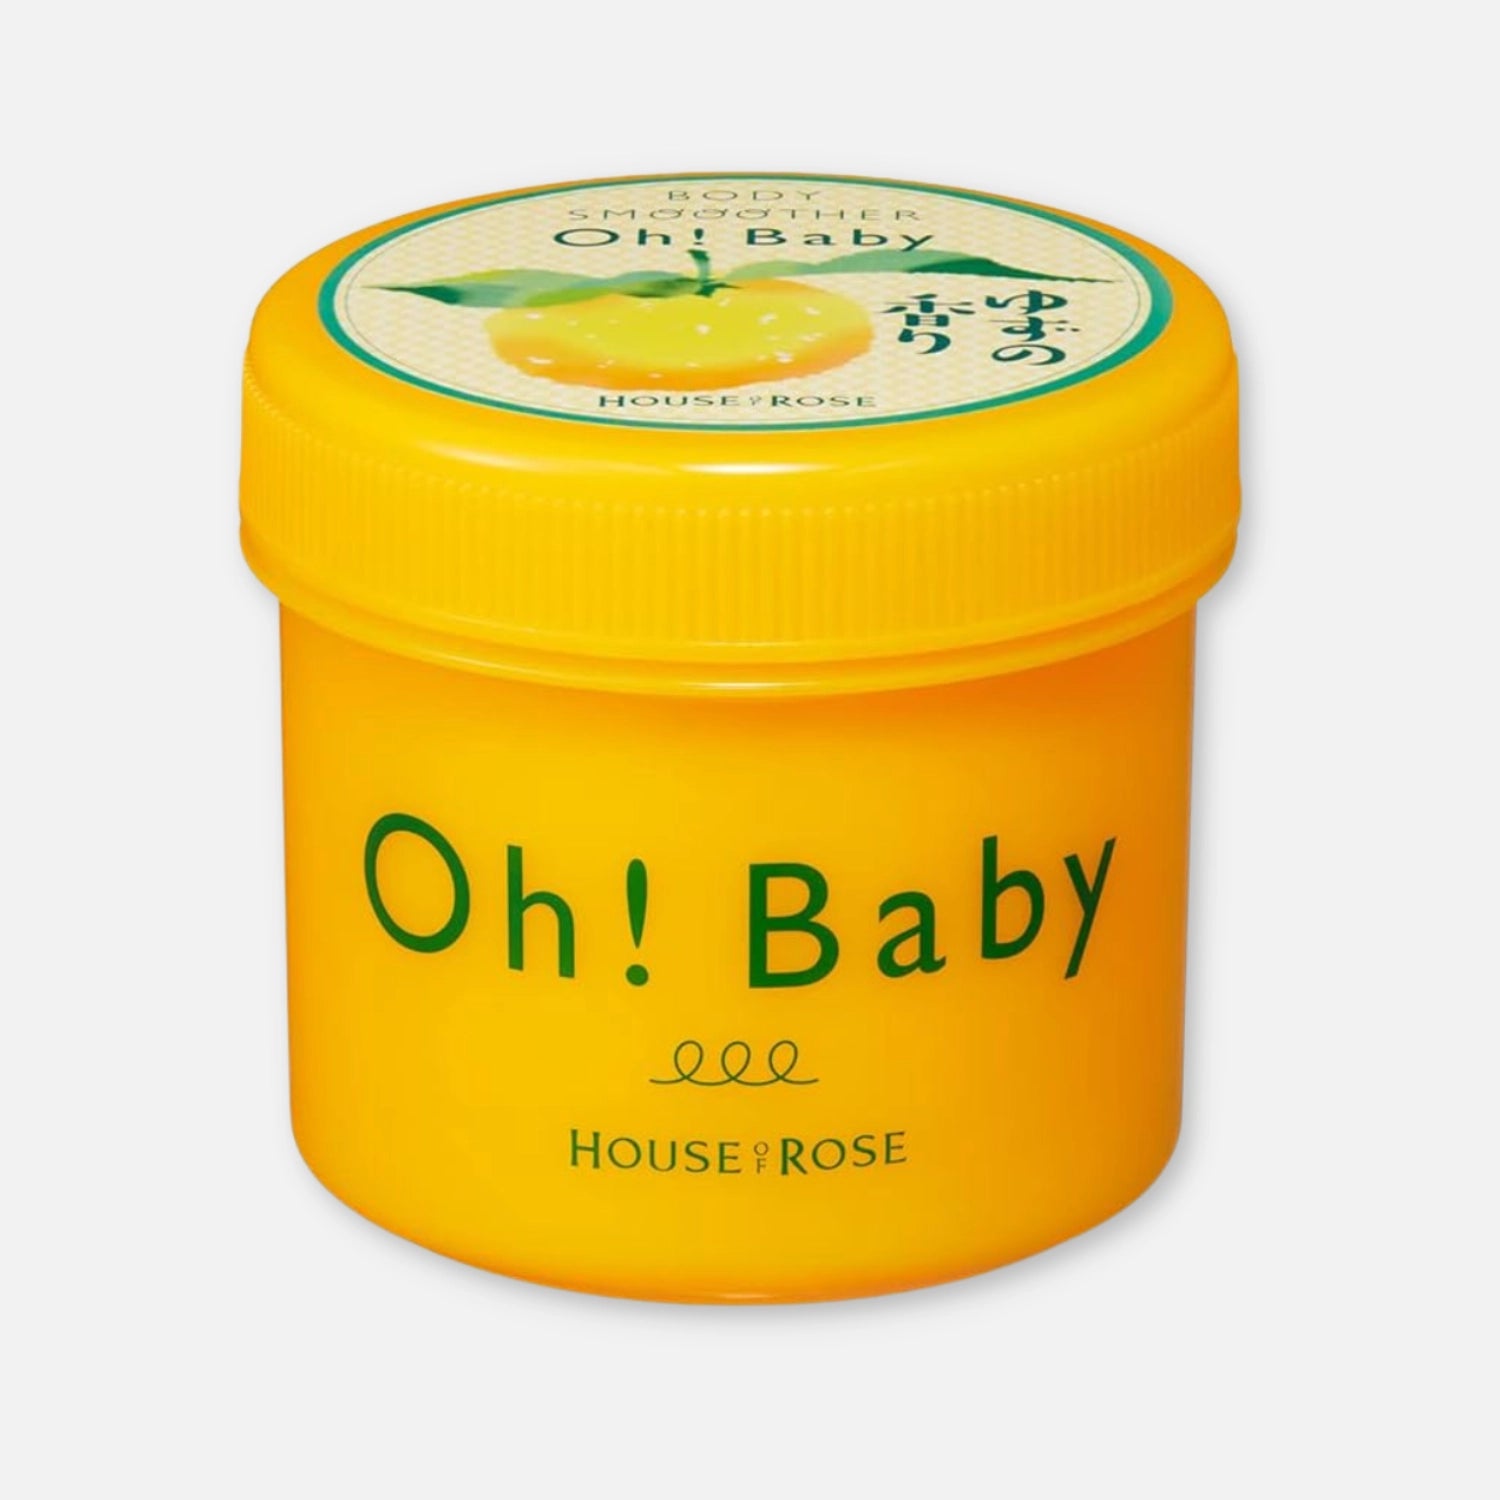 House Of Rose Oh! Baby Body Scrub Smoother Cream Yuzu 200g - Buy Me Japan